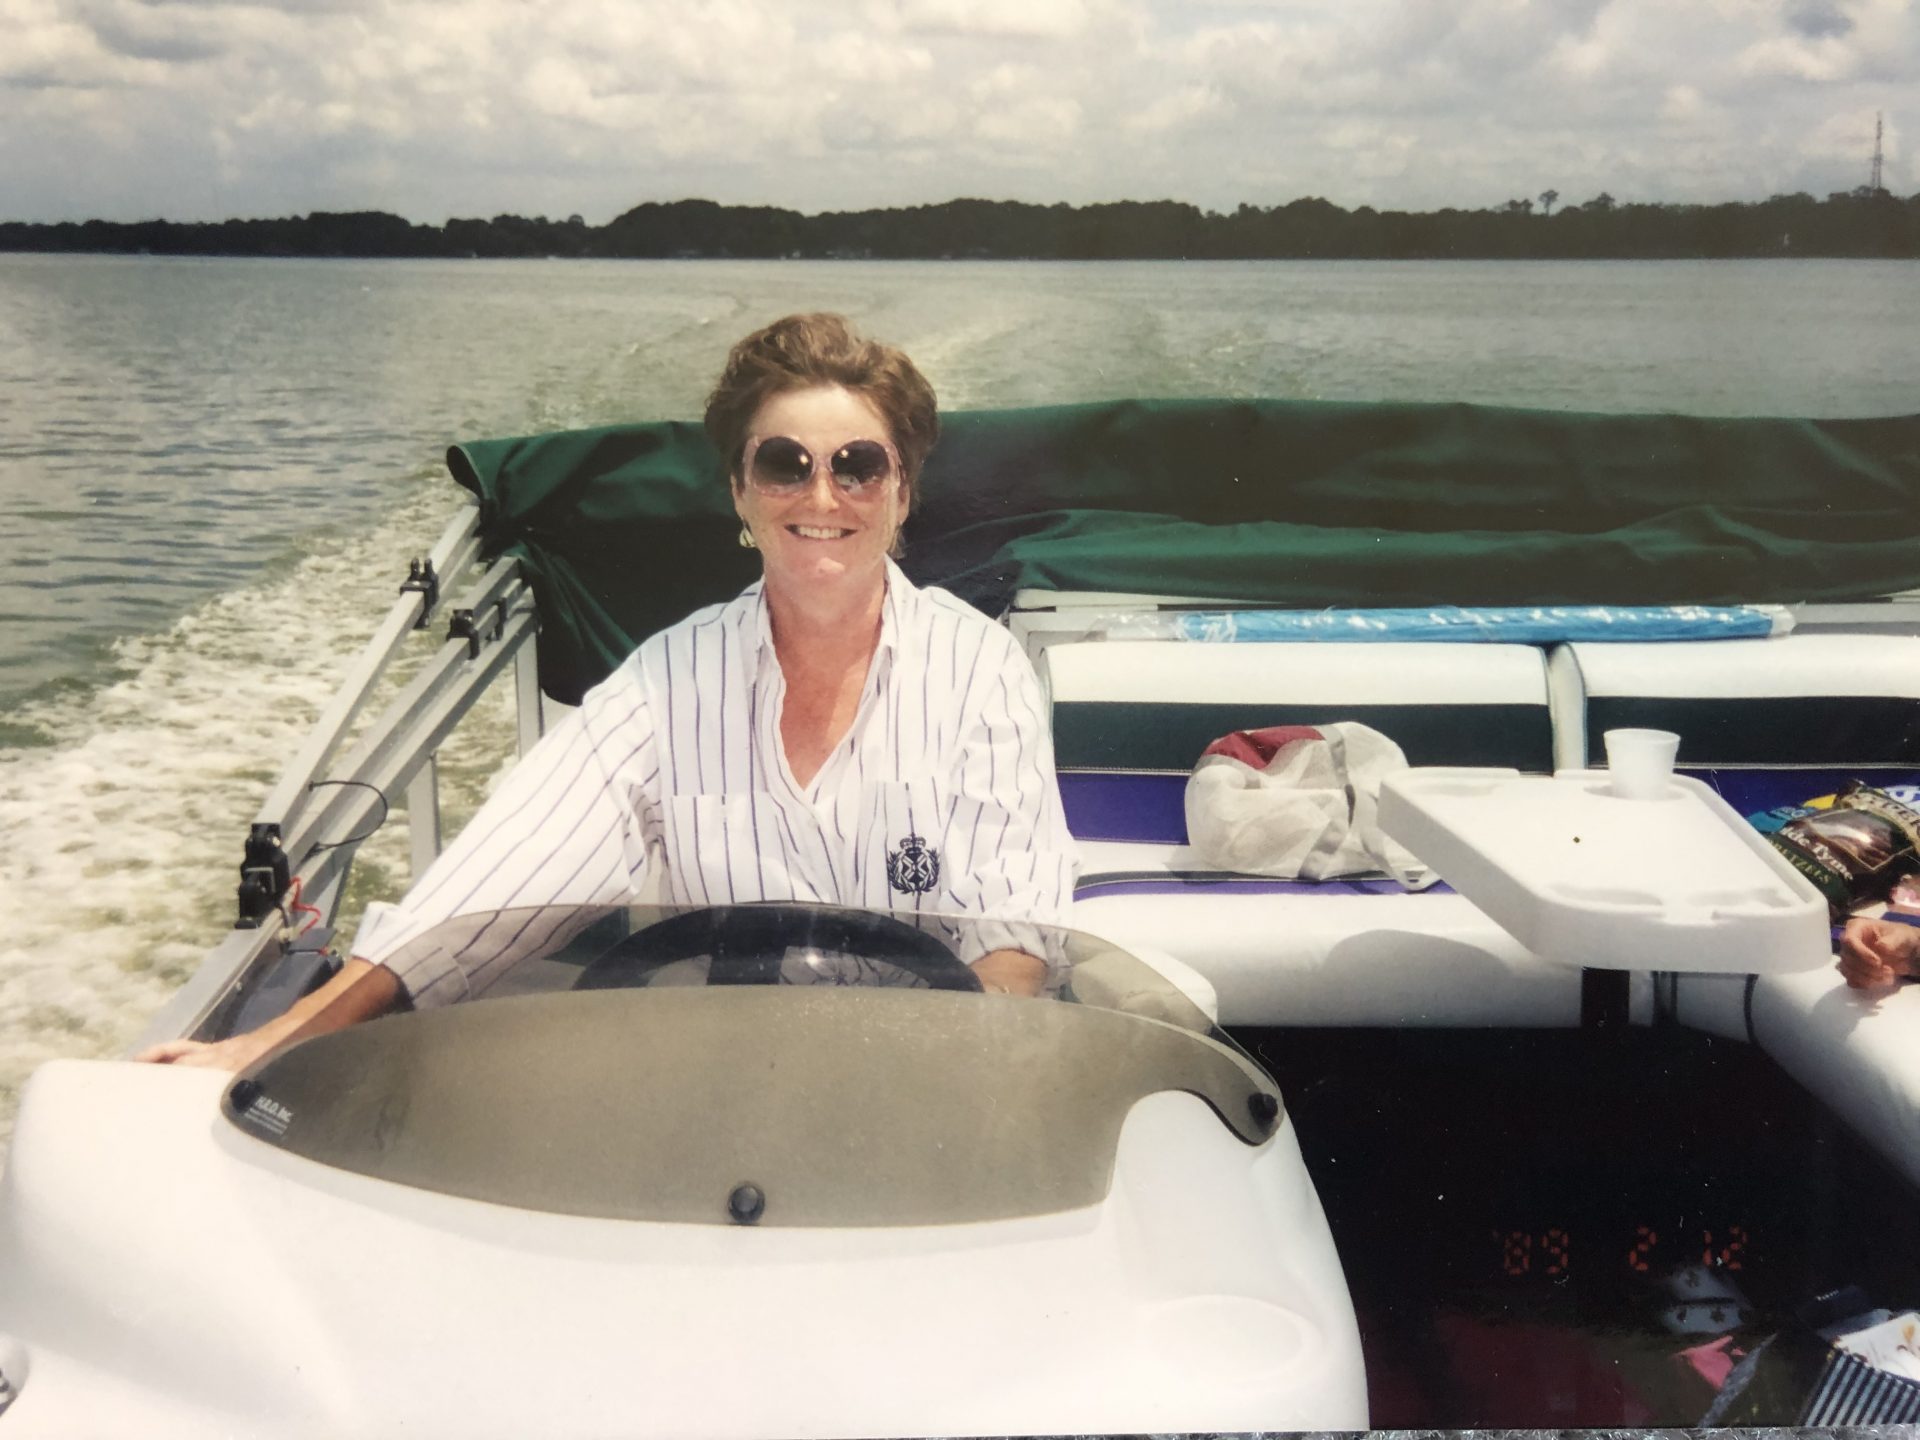 She loved the water  & boating<br />
Thanks for the pic Ed